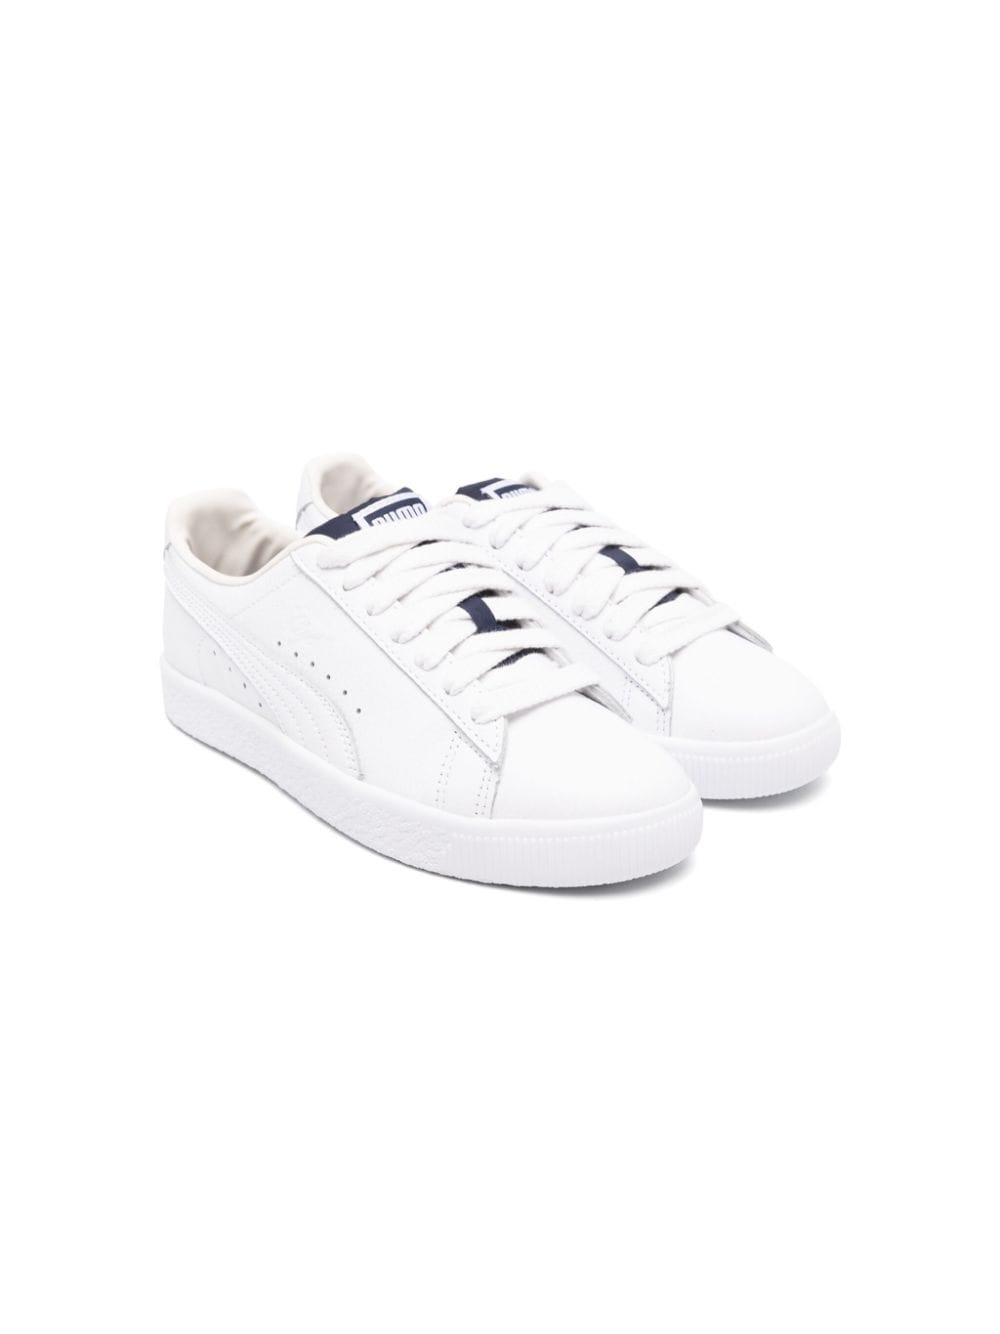 Puma Kids' Clyde Varsity Ii Leather Trainers In White